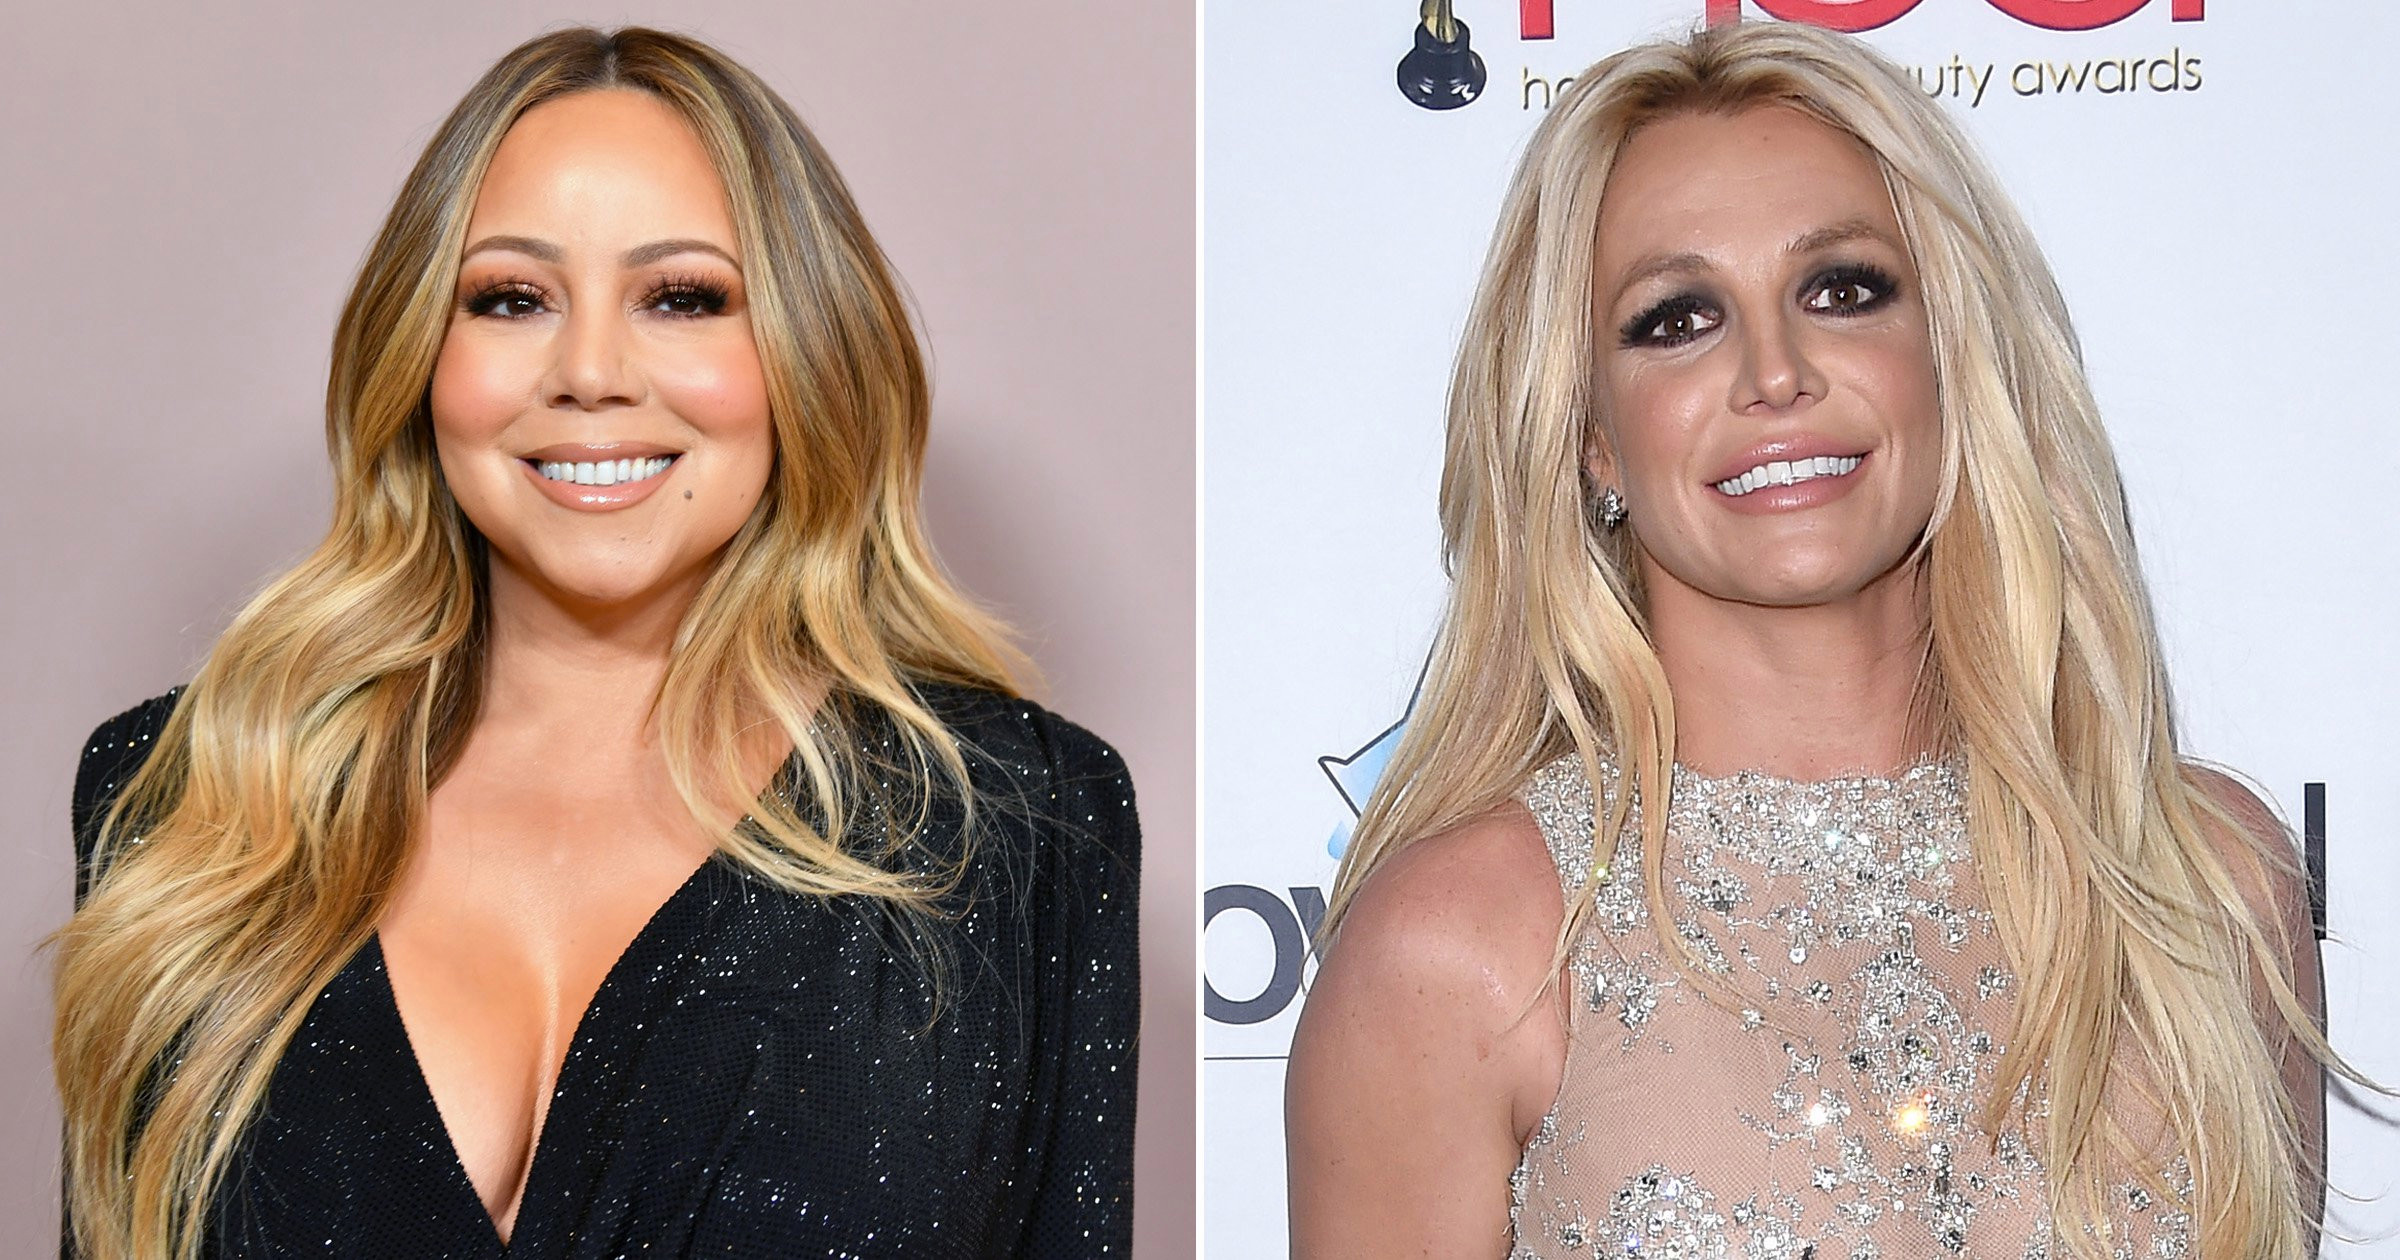 Britney Spears supported by Mariah Carey as celebs react to bombshell testimony about conservatorship